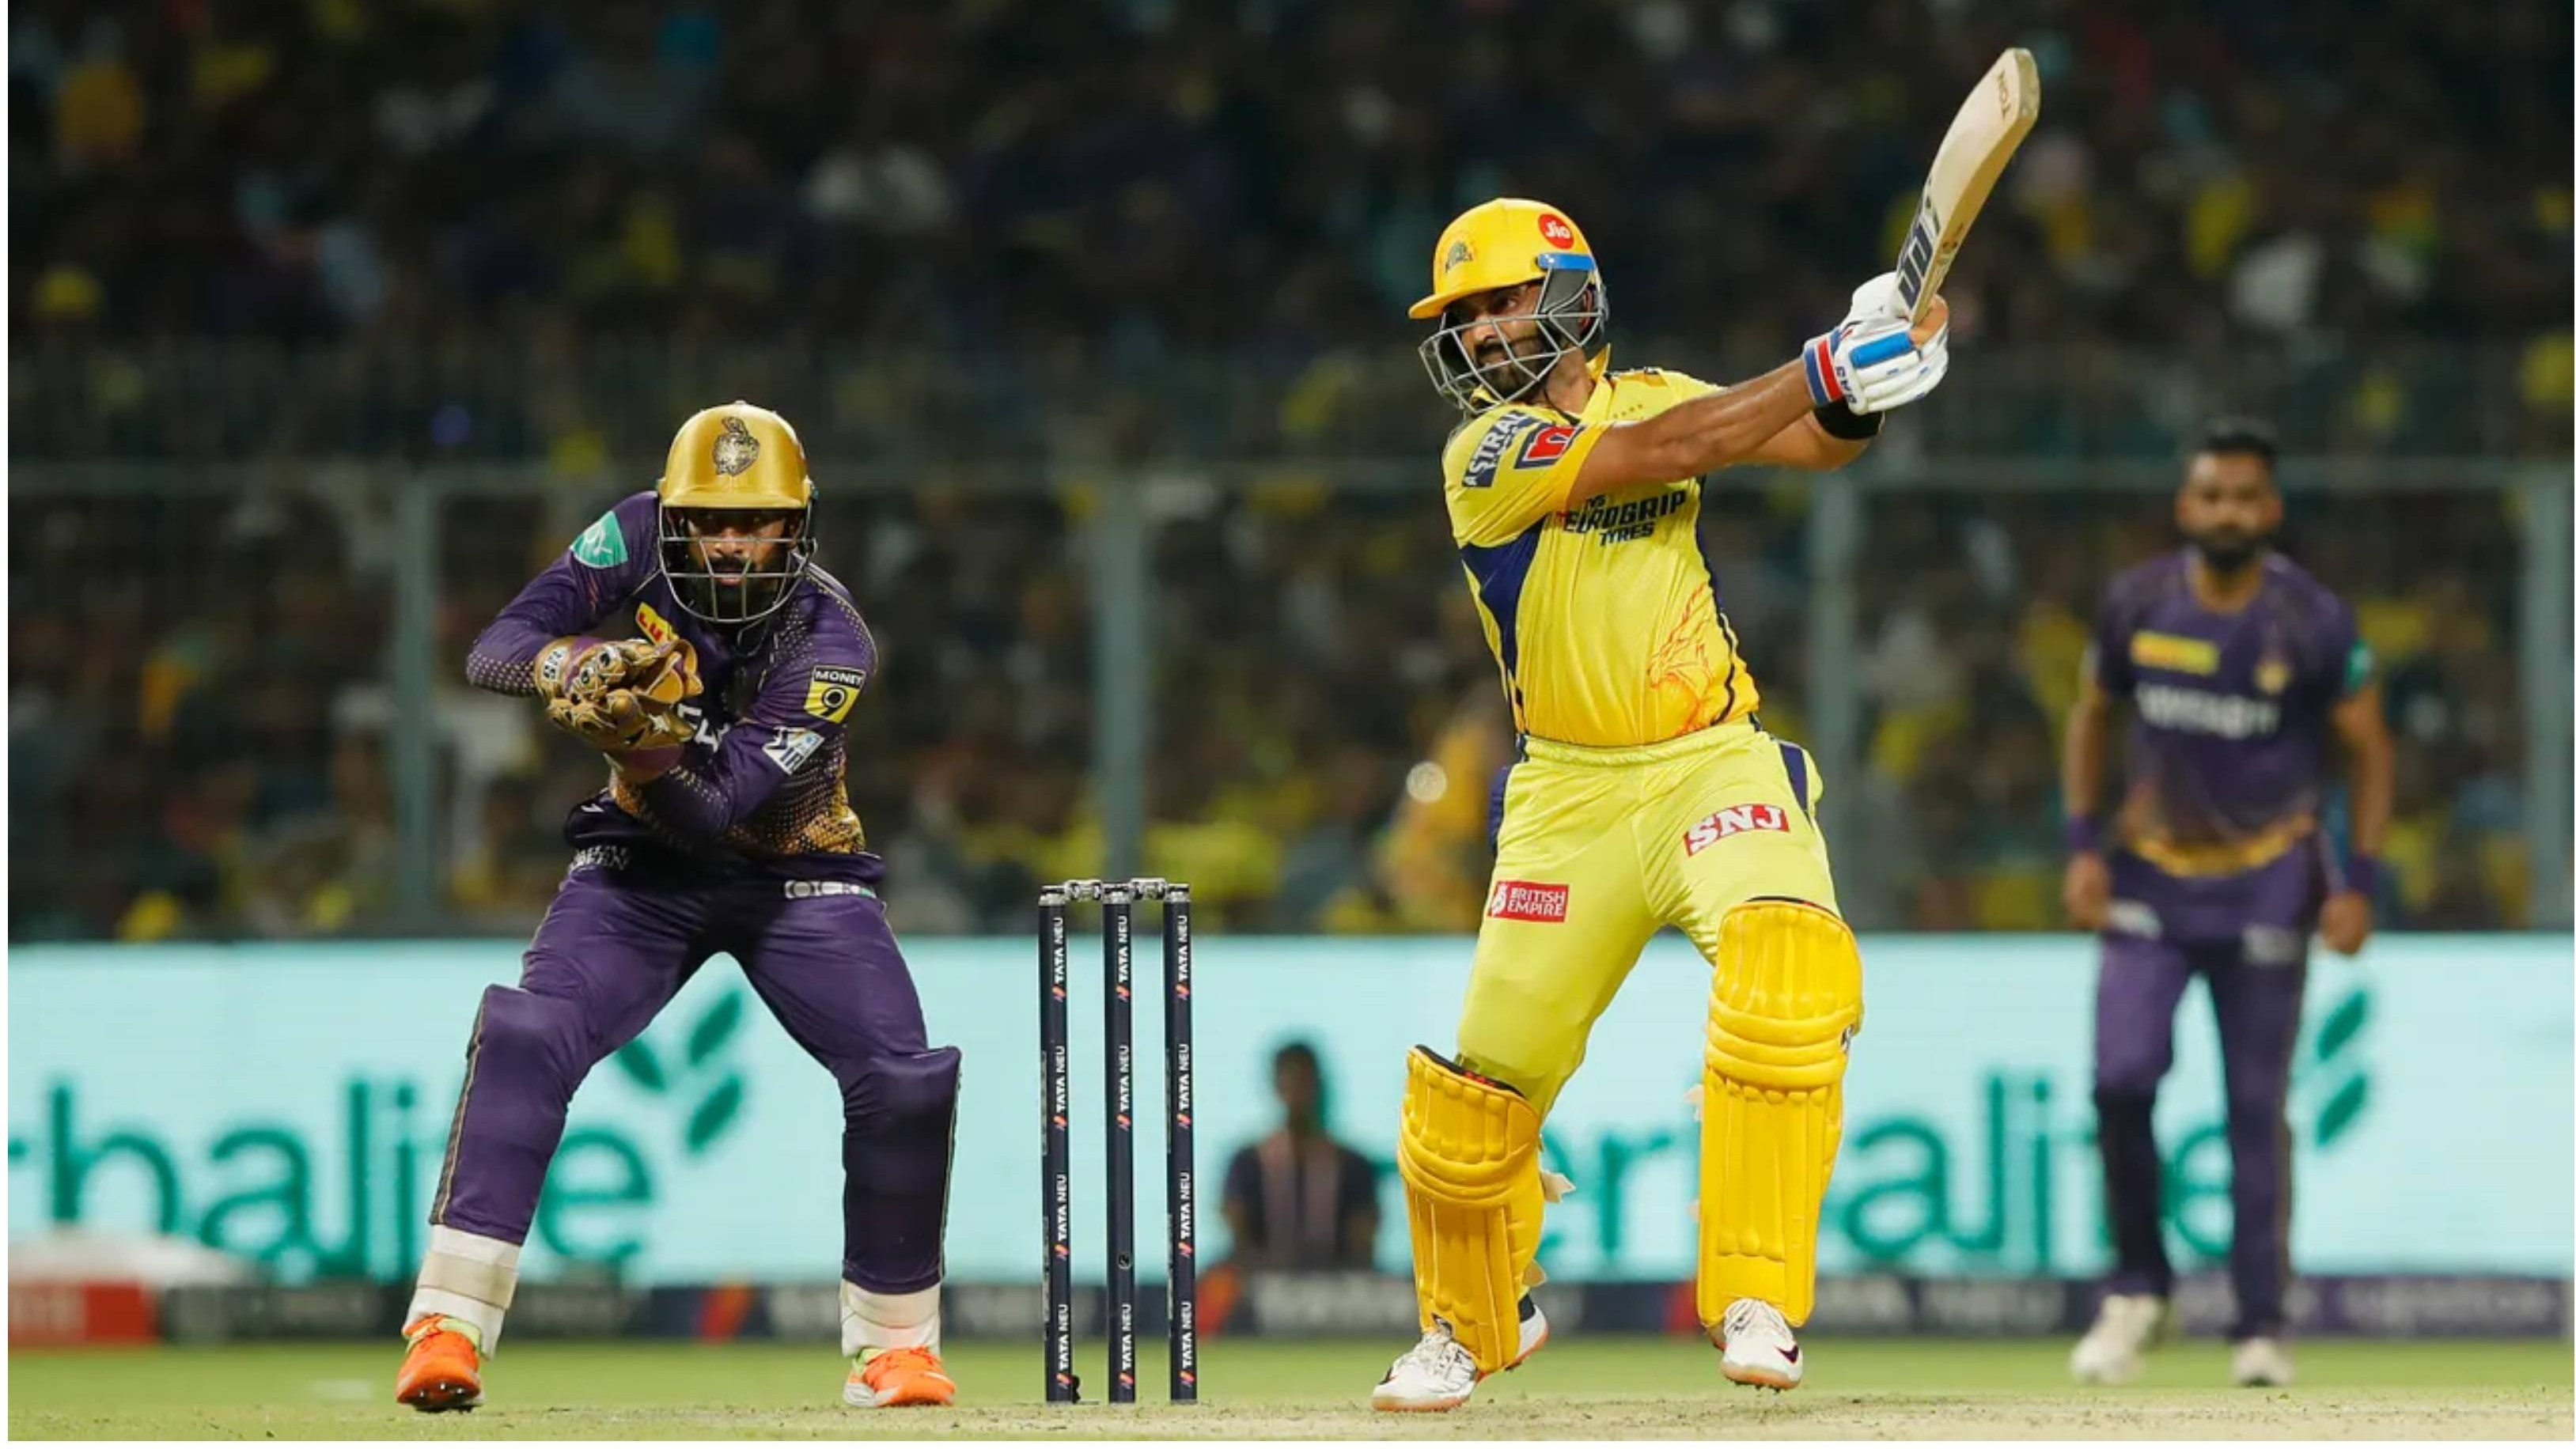 IPL 2023: “Just clear mindset and nothing else,” says Rahane after slamming 29-ball 71* against KKR